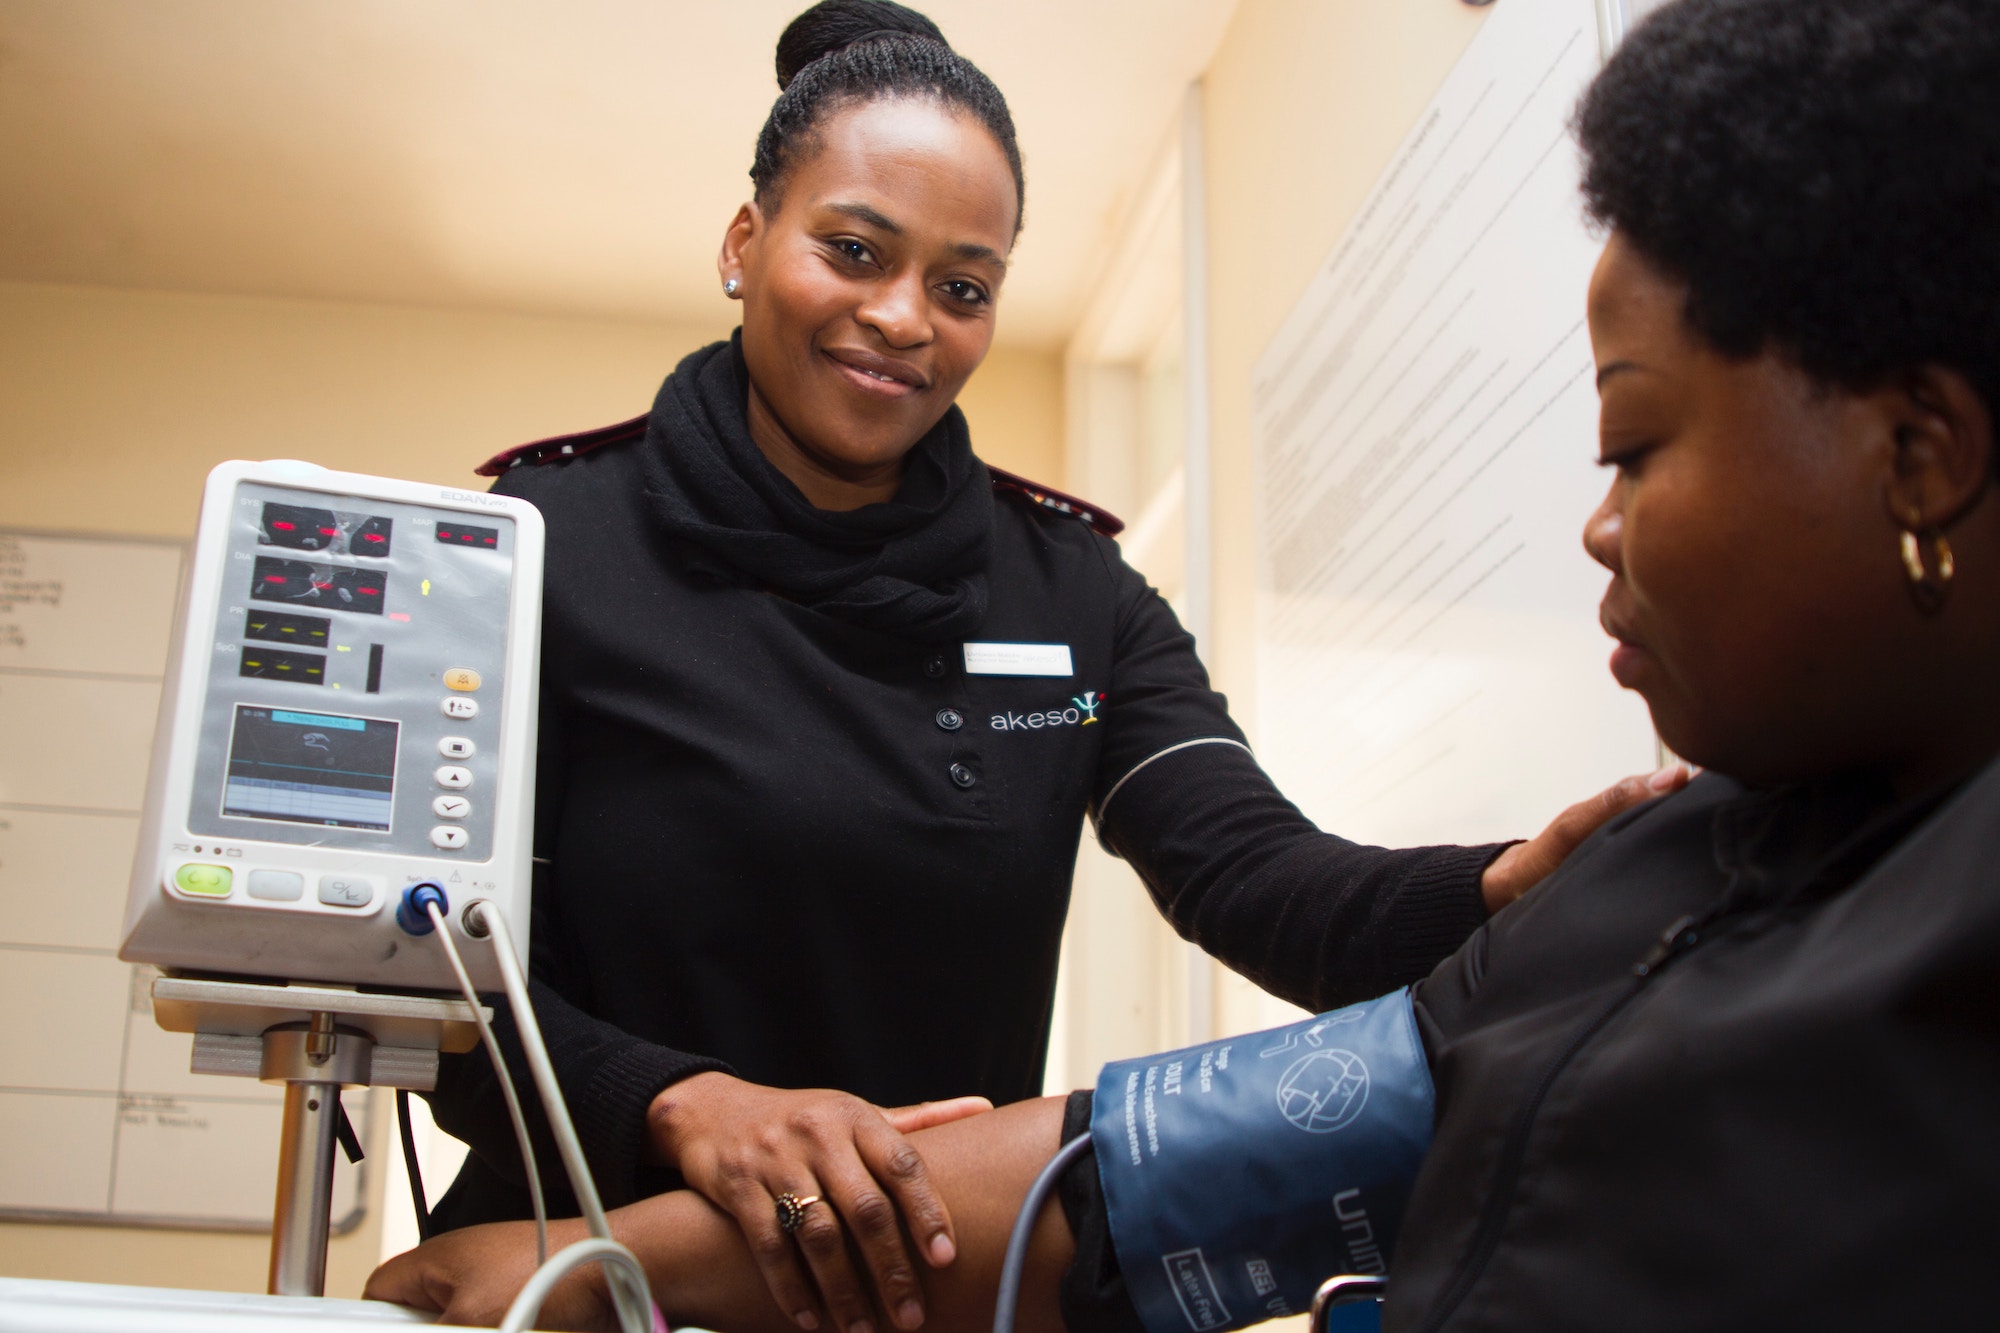 Black nurse in scrubs with her hair up in a bun takes vital signs of a black patient who is sitting in a chair and looking at the blood pressure cuff on her arm